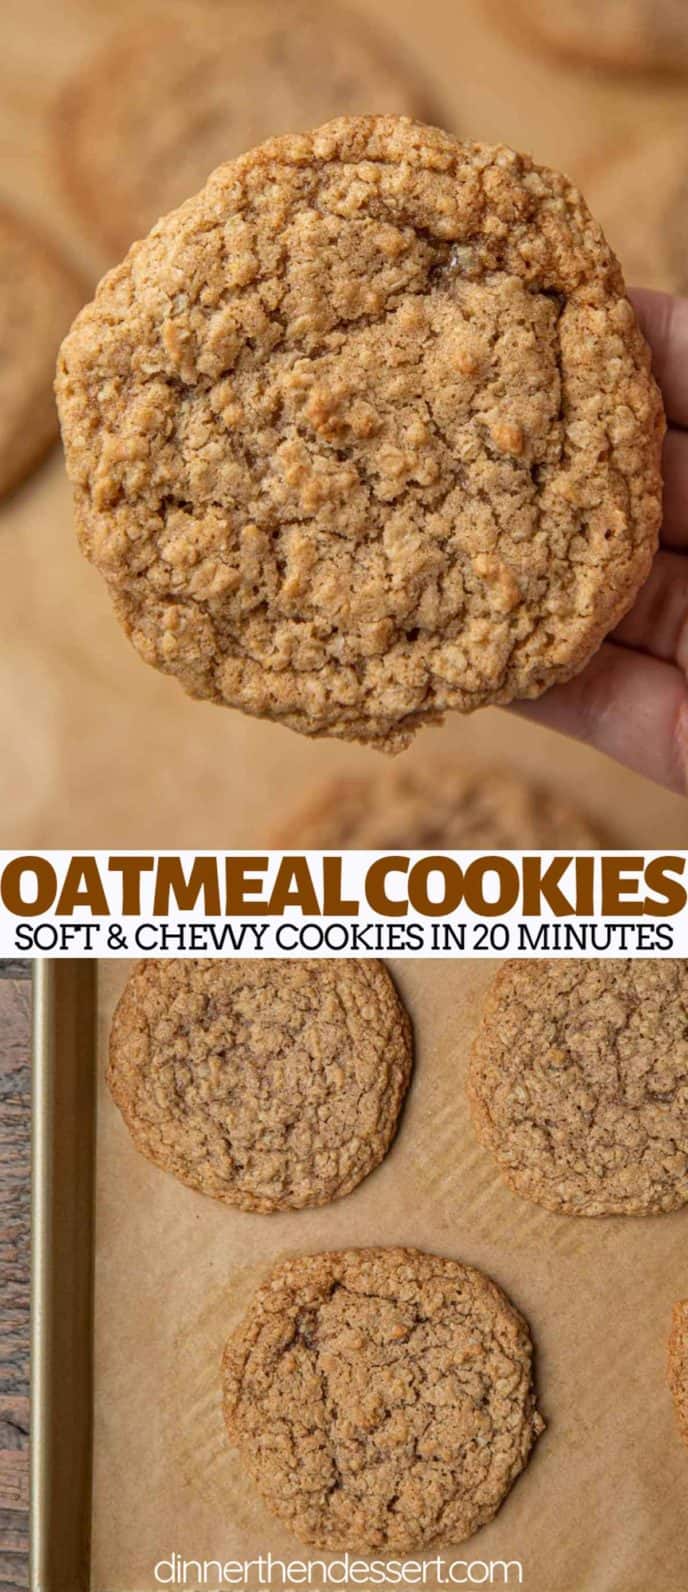 Oatmeal Cookies close up